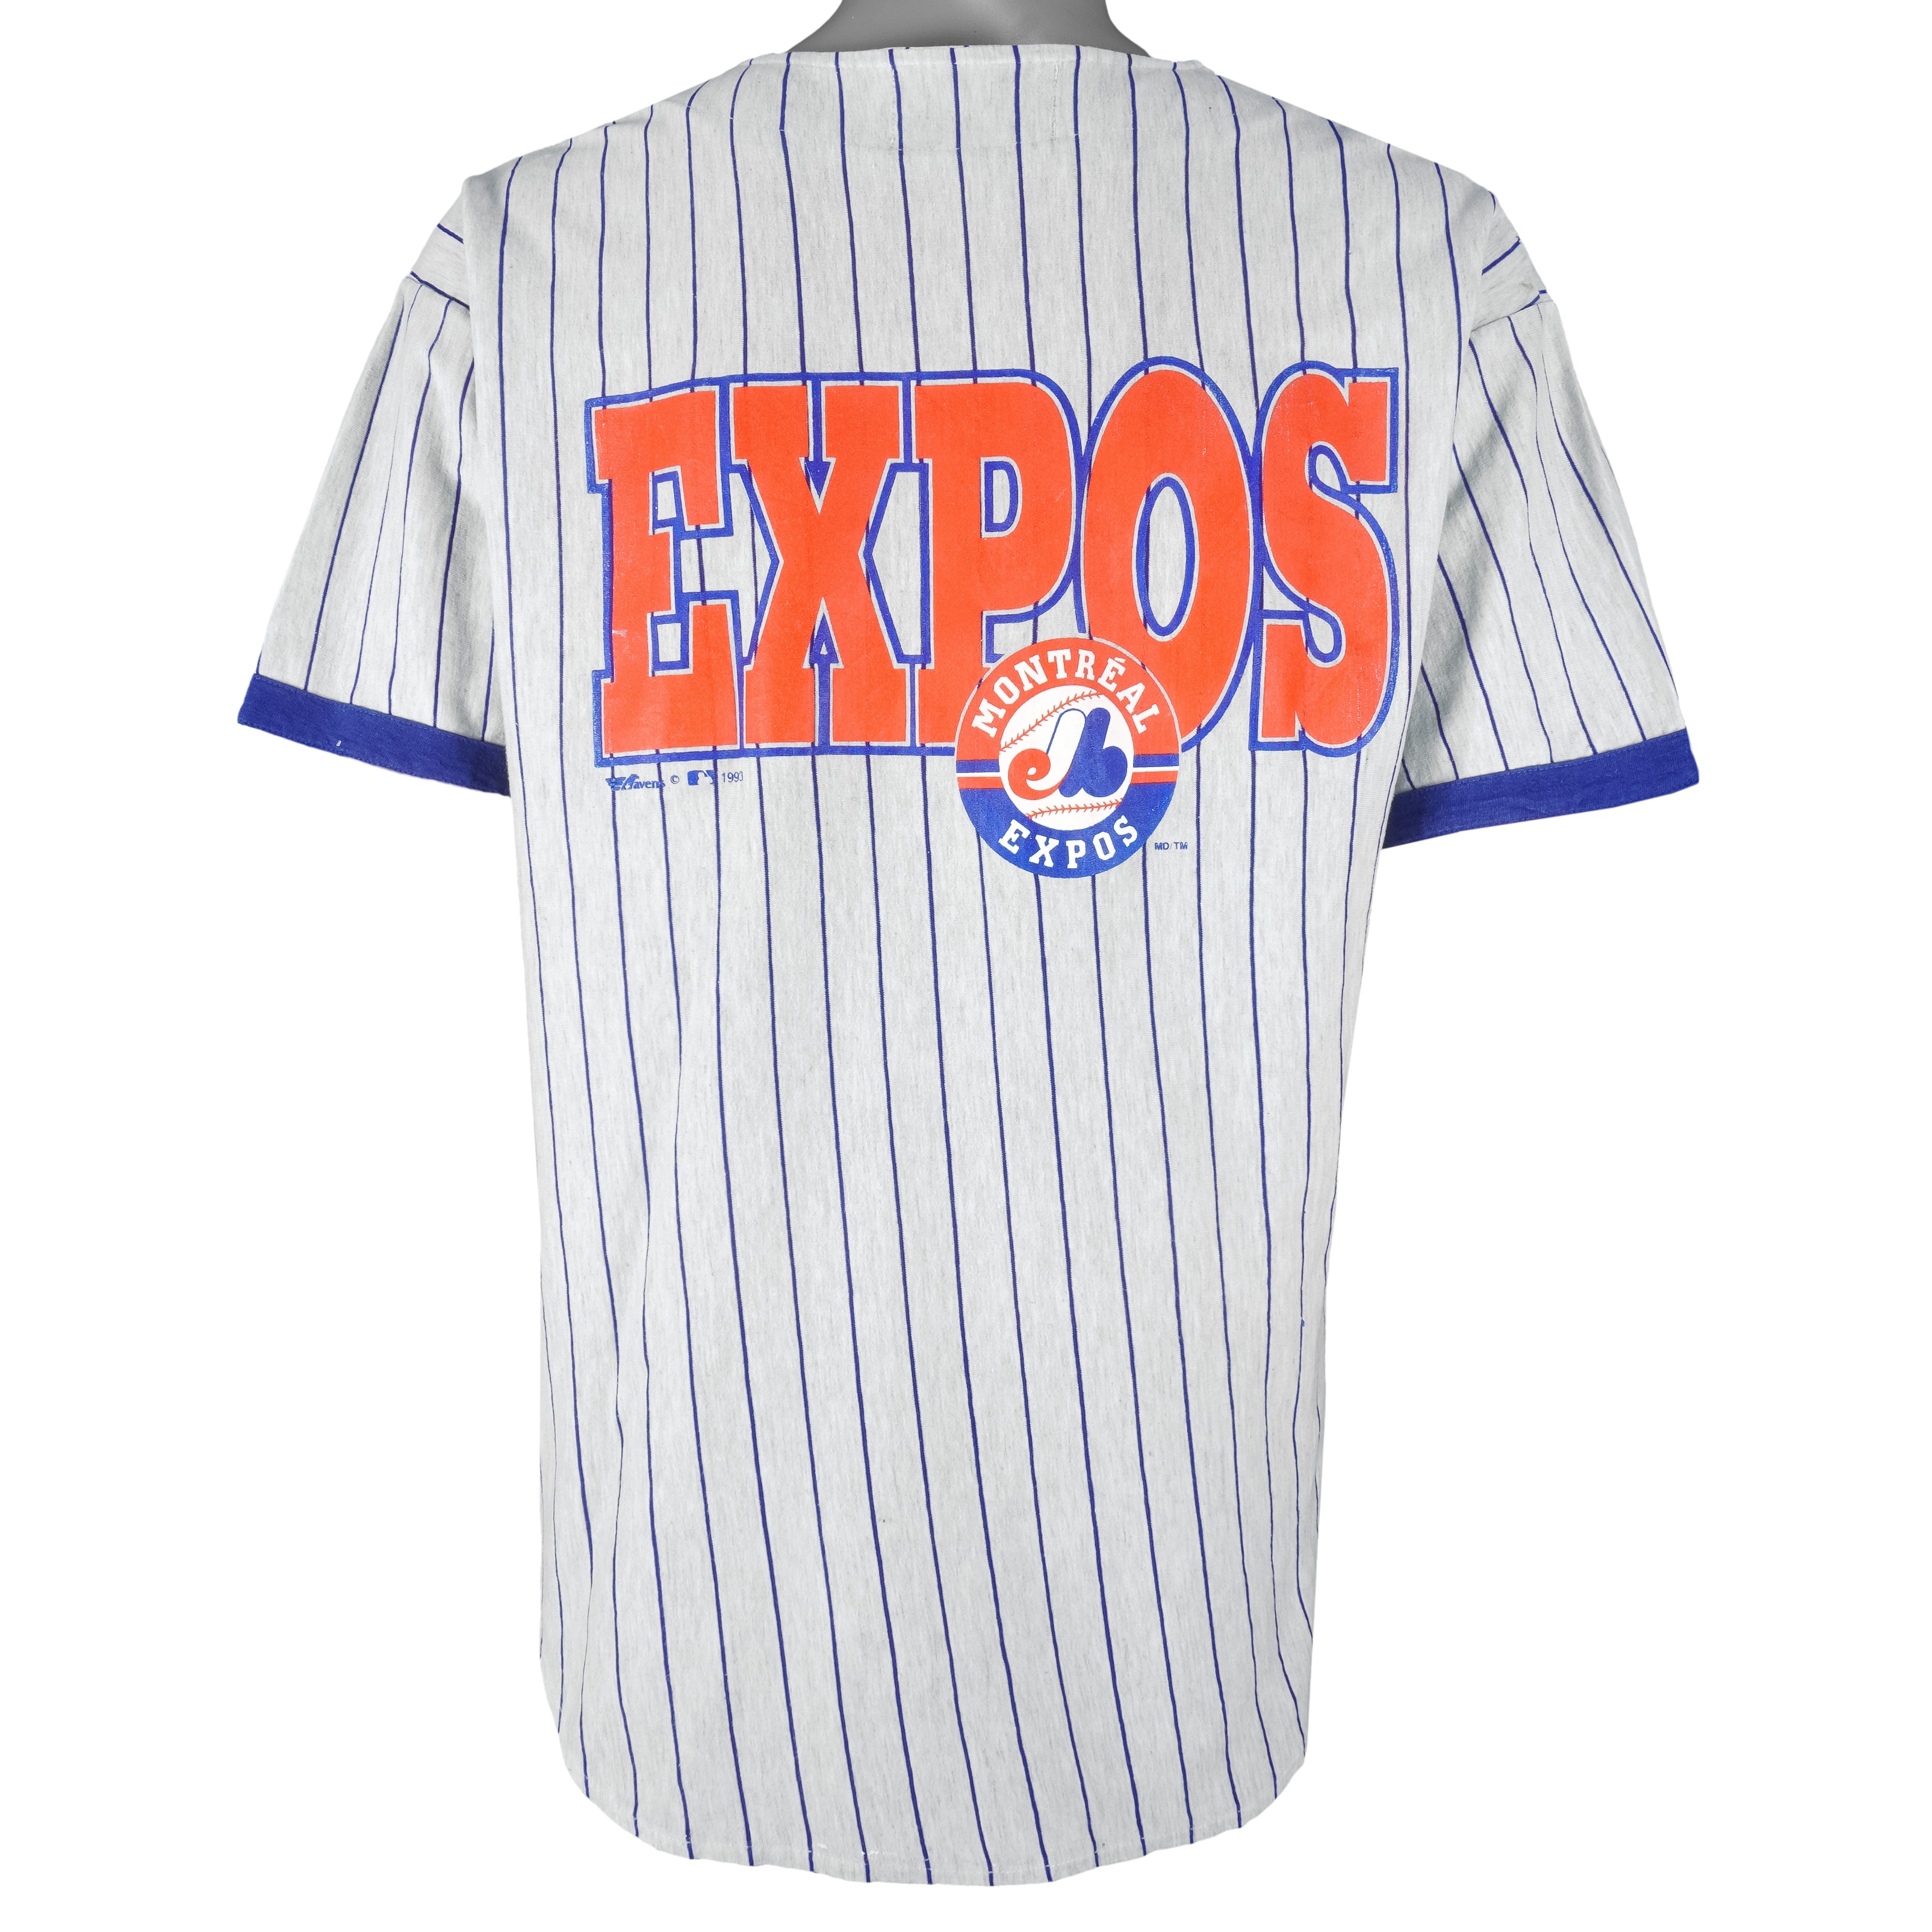 Montreal Expos Vintage Jersey - Tricolore Sports